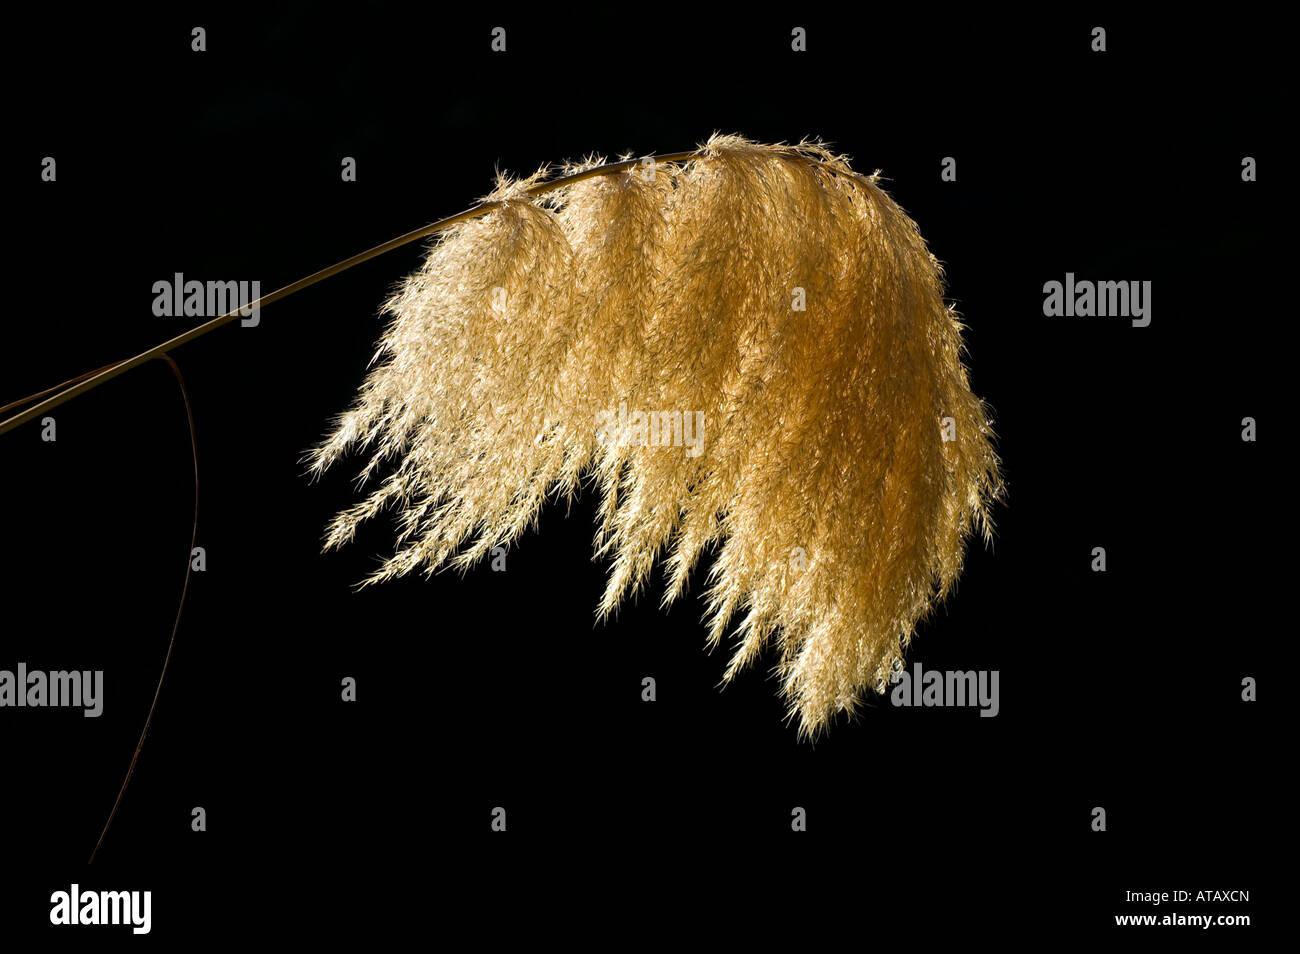 A toi toi (native New Zealand grass) backlit by the sun Stock Photo